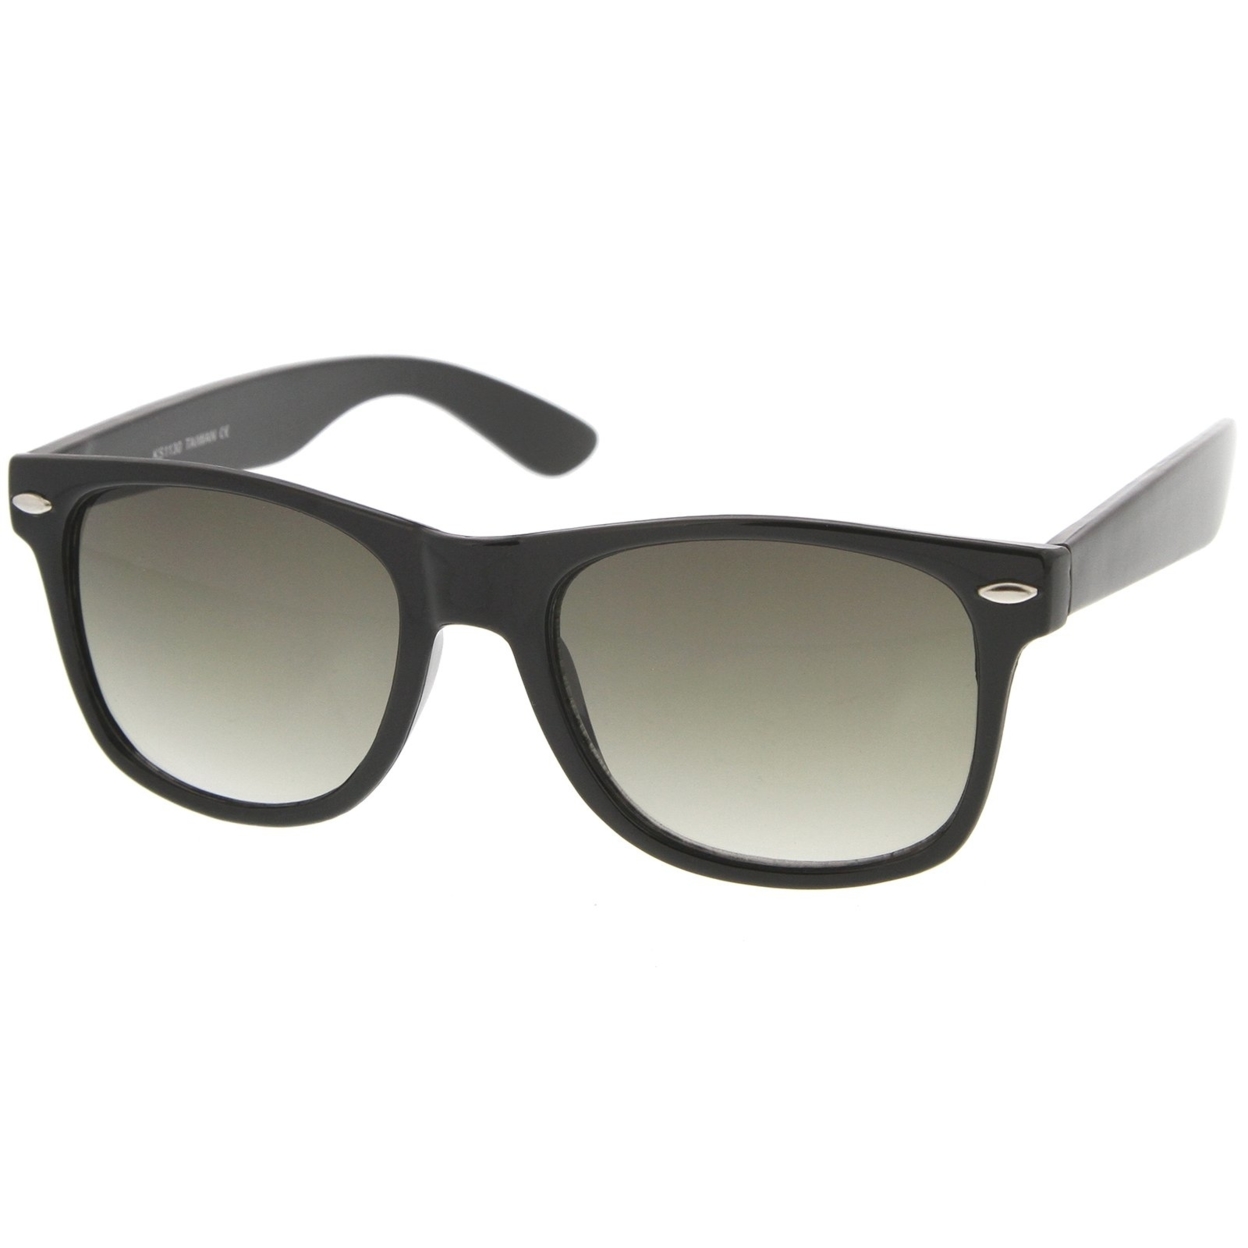 Classic Wide Temples Neutral-Hued Square Lens Horn Rimmed Sunglasses 54mm - Shiny Black / Grey-Gradient